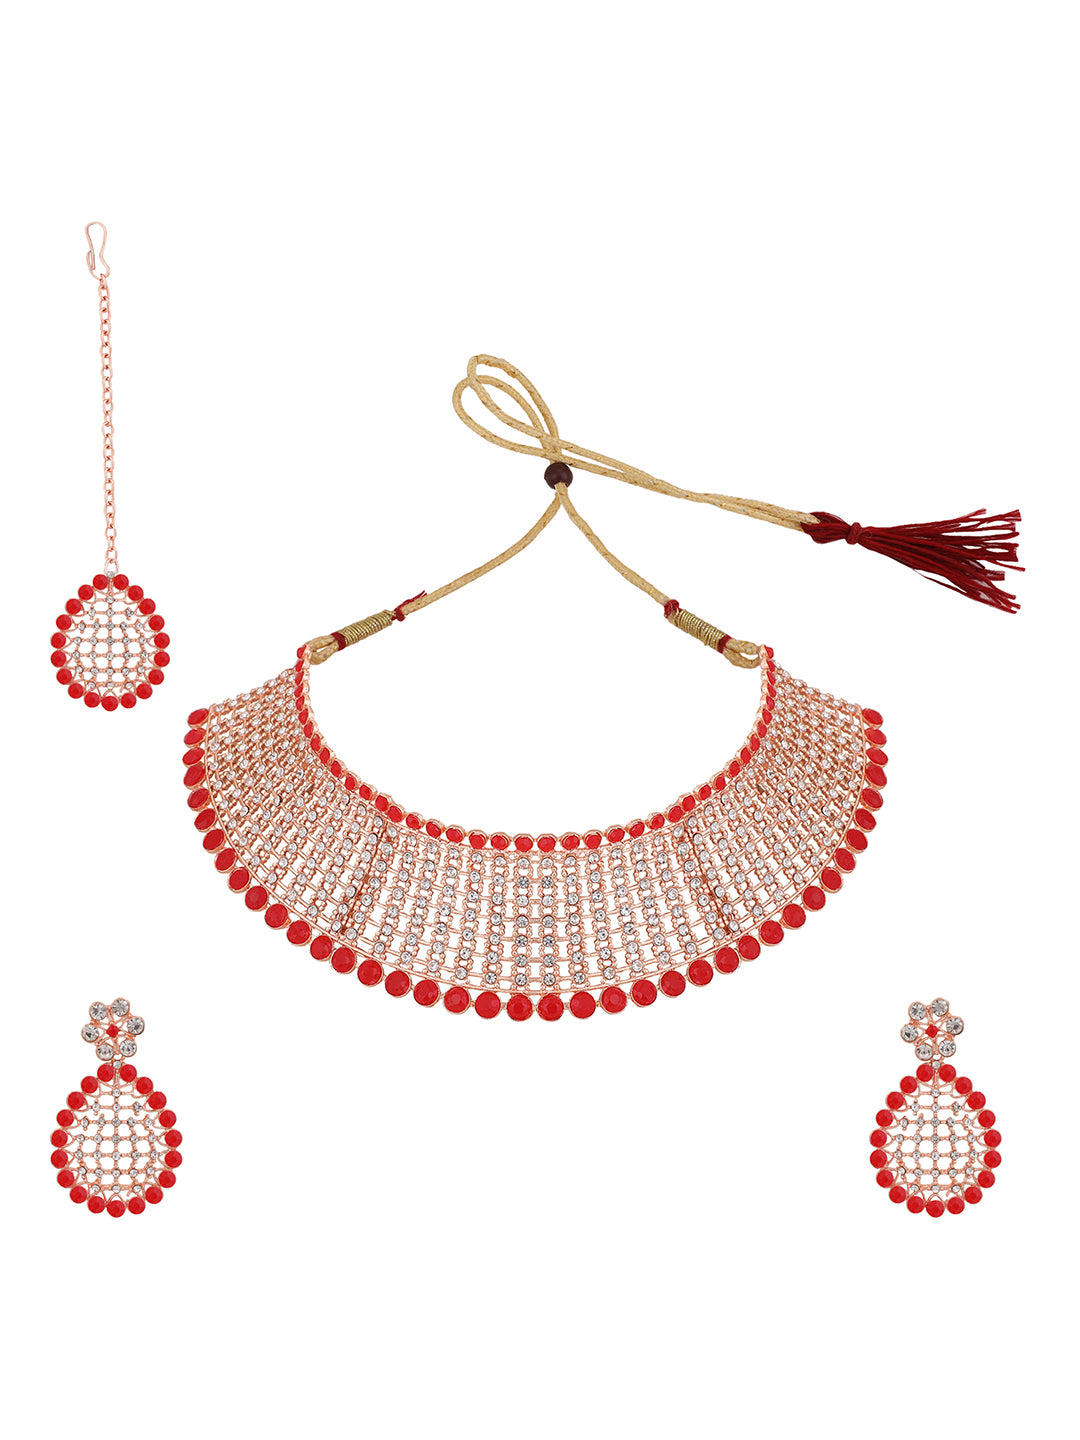 Women's Gold-Plated & Red Ad-Studded & Stylish Jewellery Set With Earring Maangtika - Anikas Creation